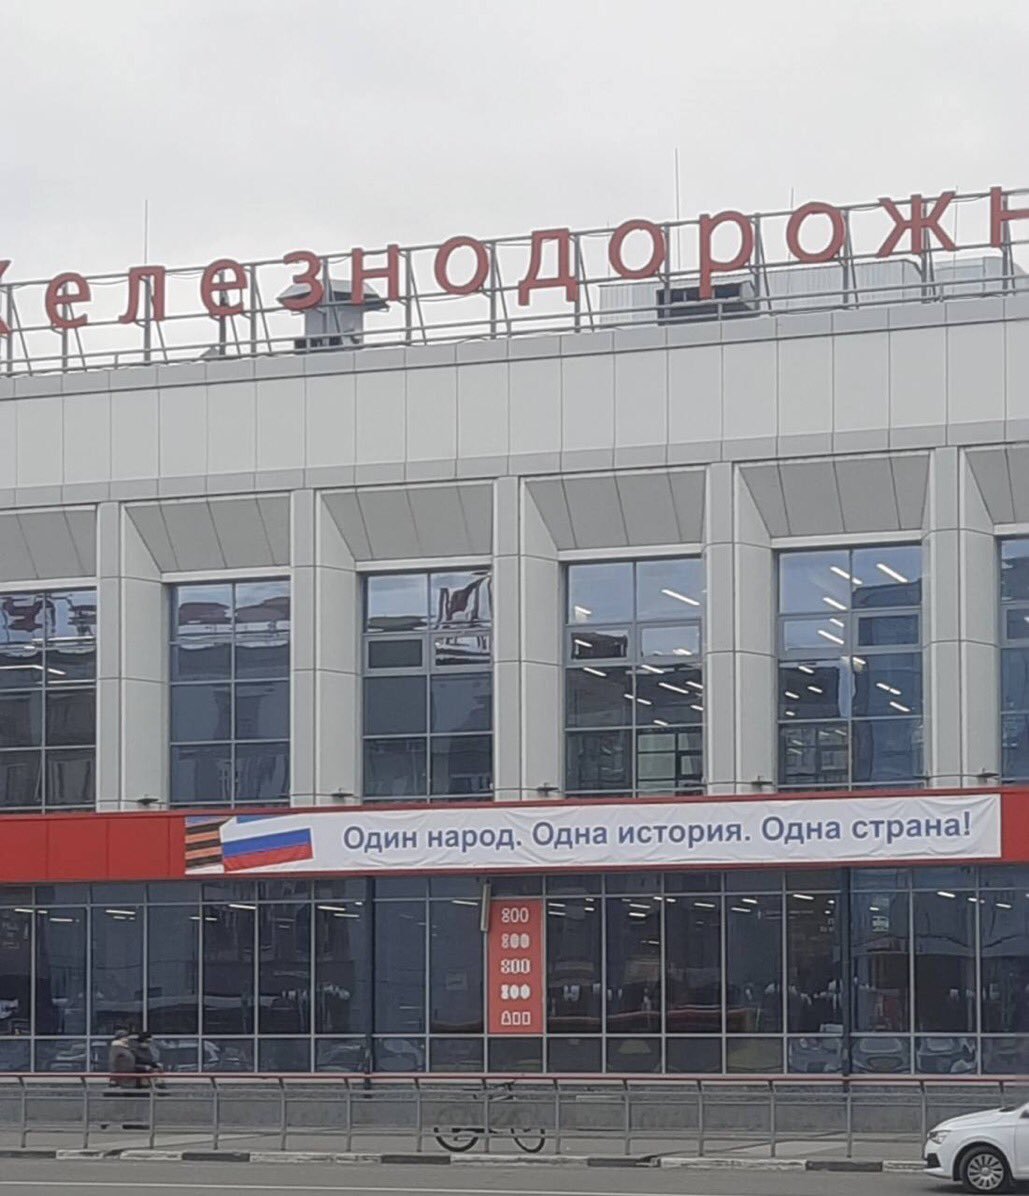 Sign on a railway station in 🇷🇺 that says: 'One people, one history, one country'. 🇷🇺 actually has an official internal ideology of building a single Russian state nation, not to be confused with the Russian nation in ethnic terms.